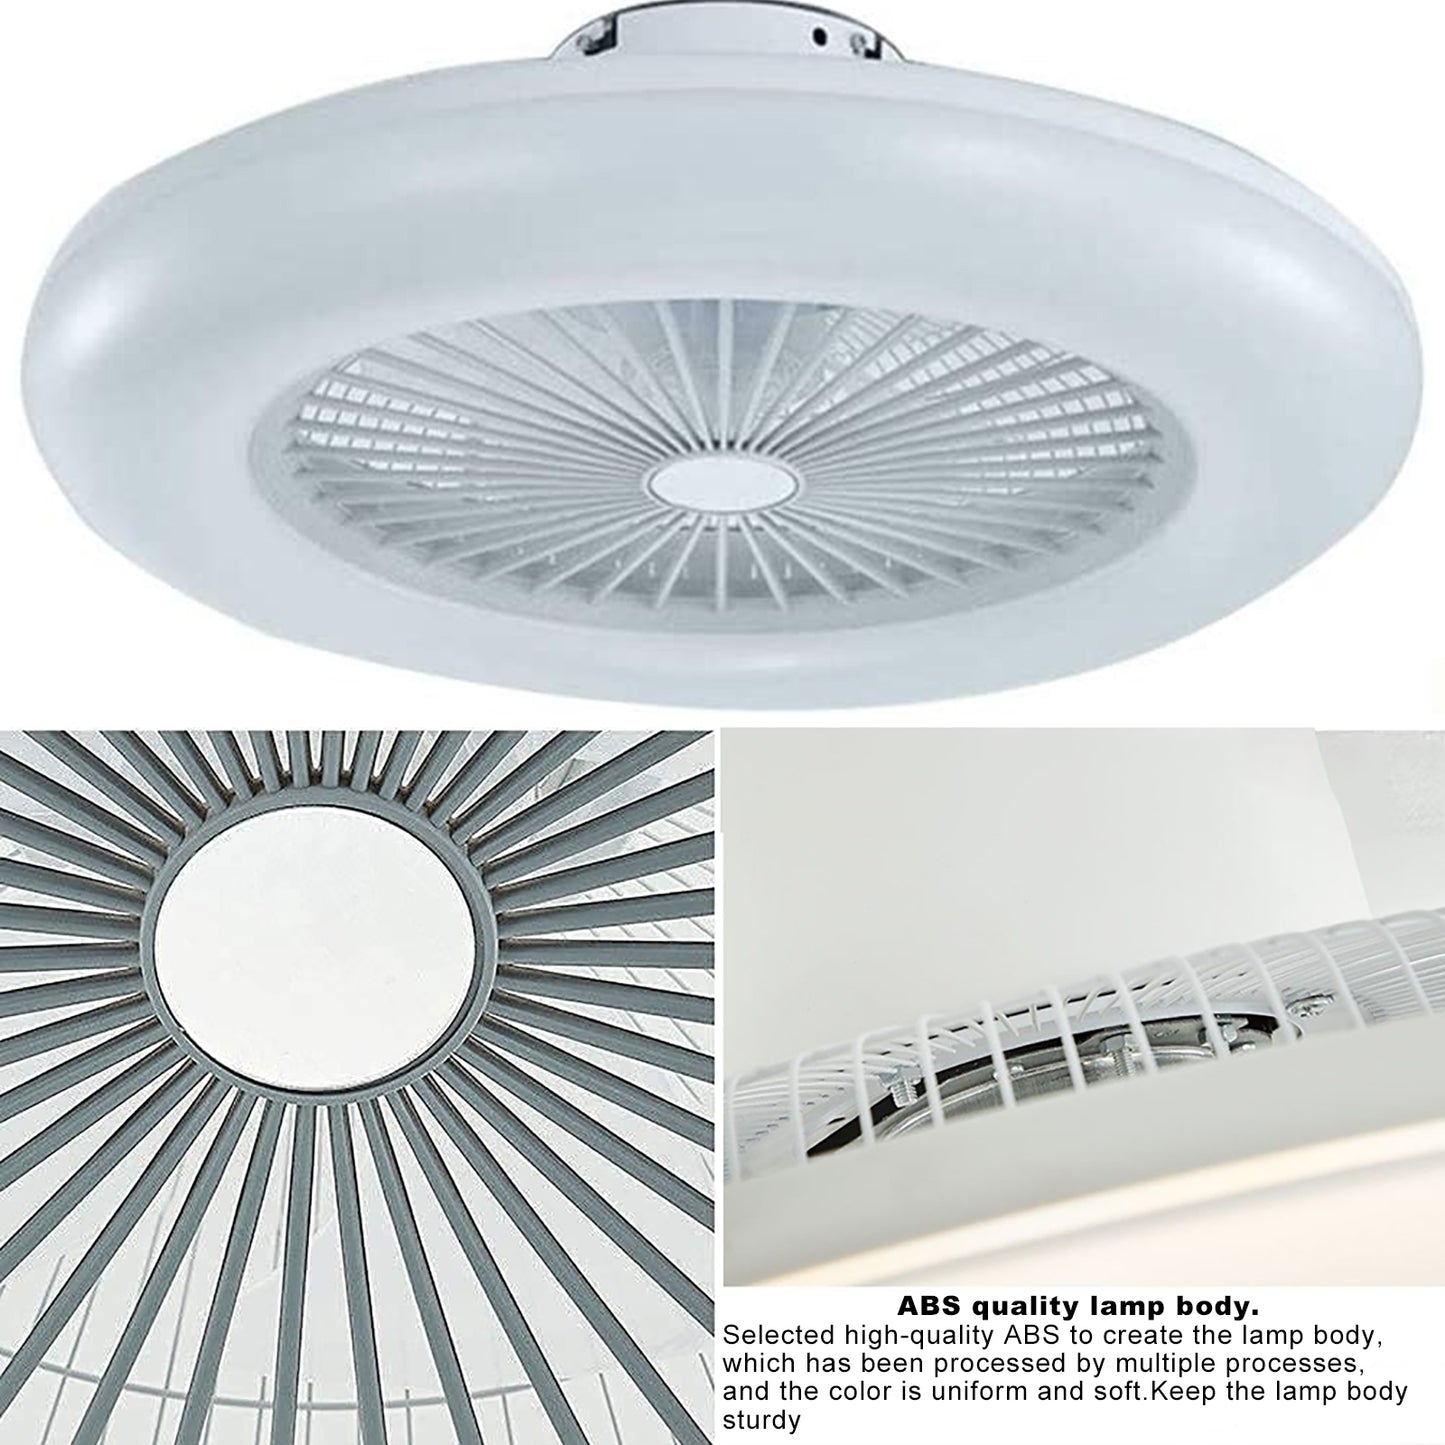 Enclosed Ceiling Fan with Light Flush Mount